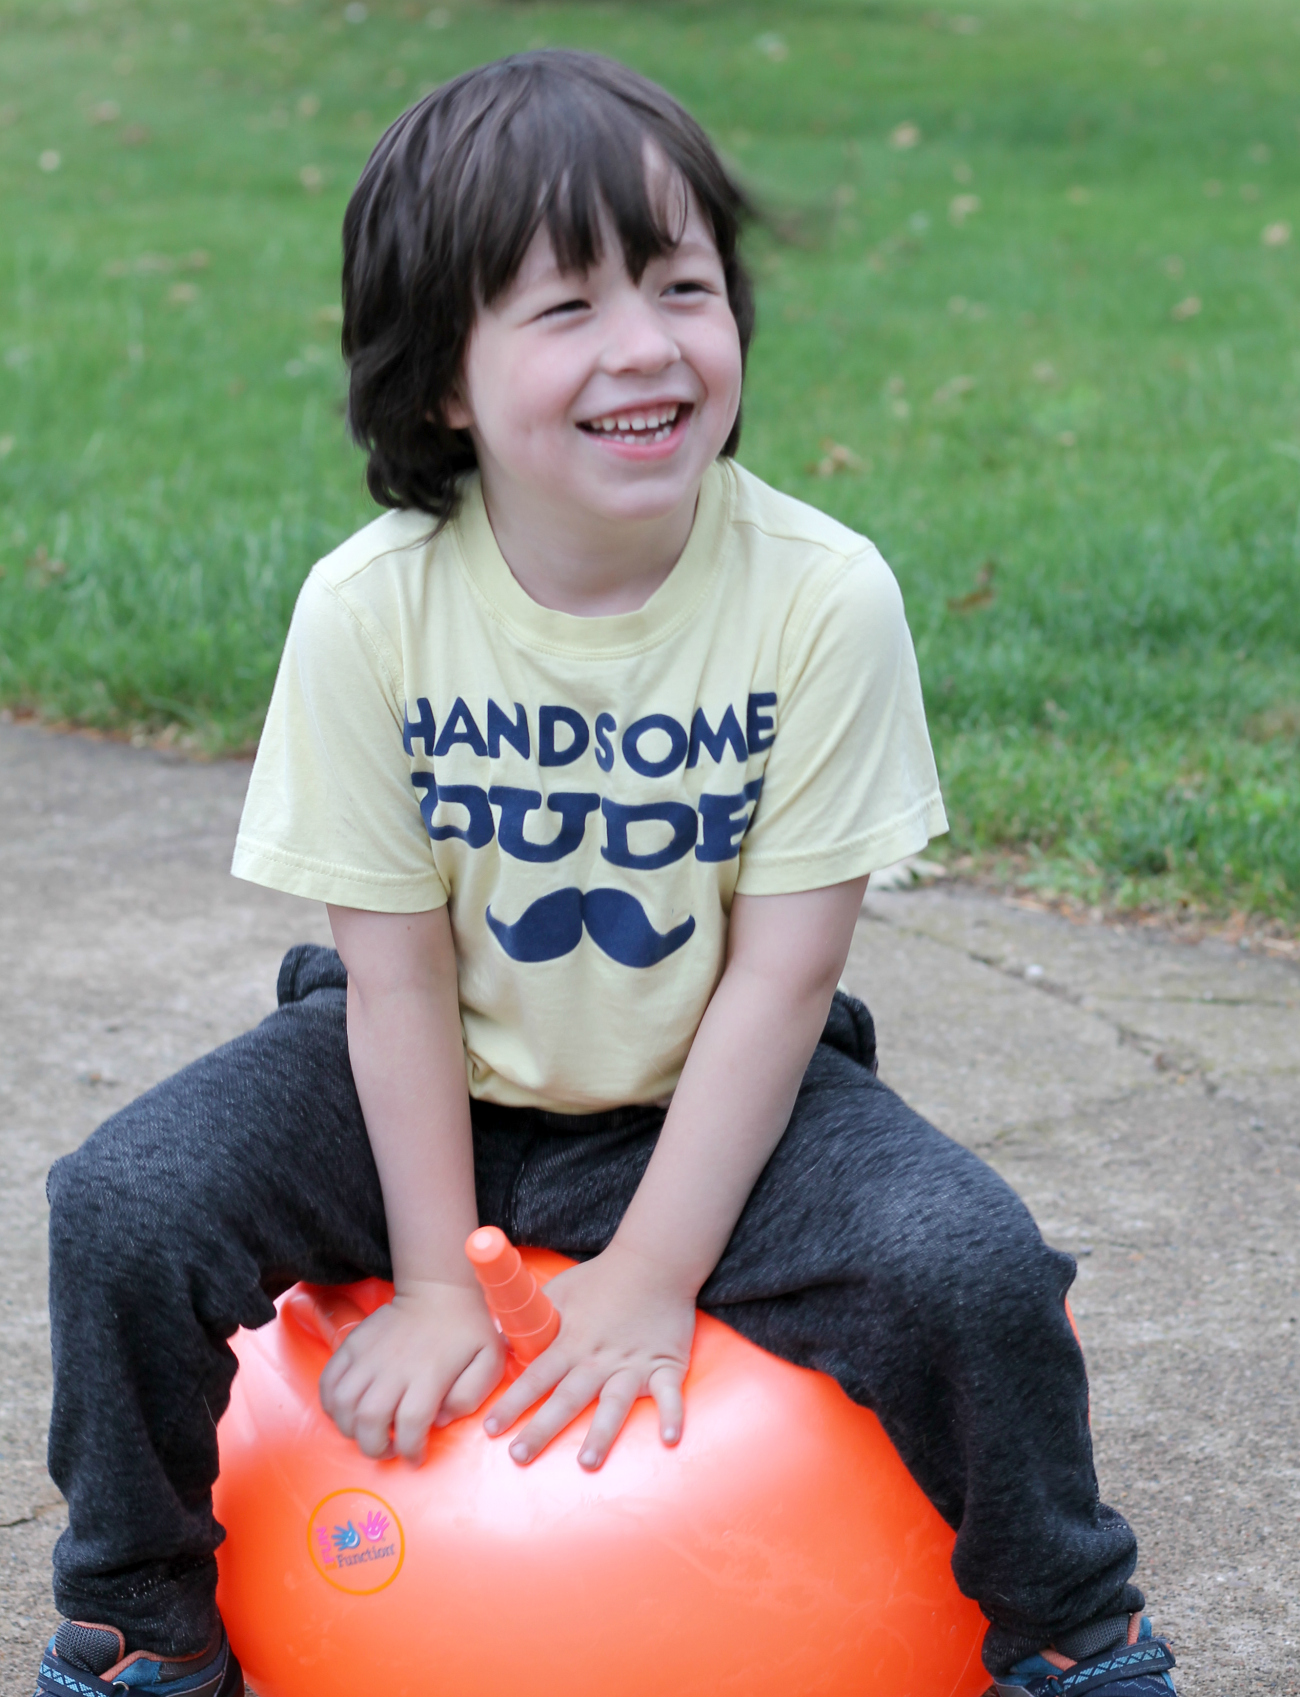 Autism Favorite Boredom Busters for Summer